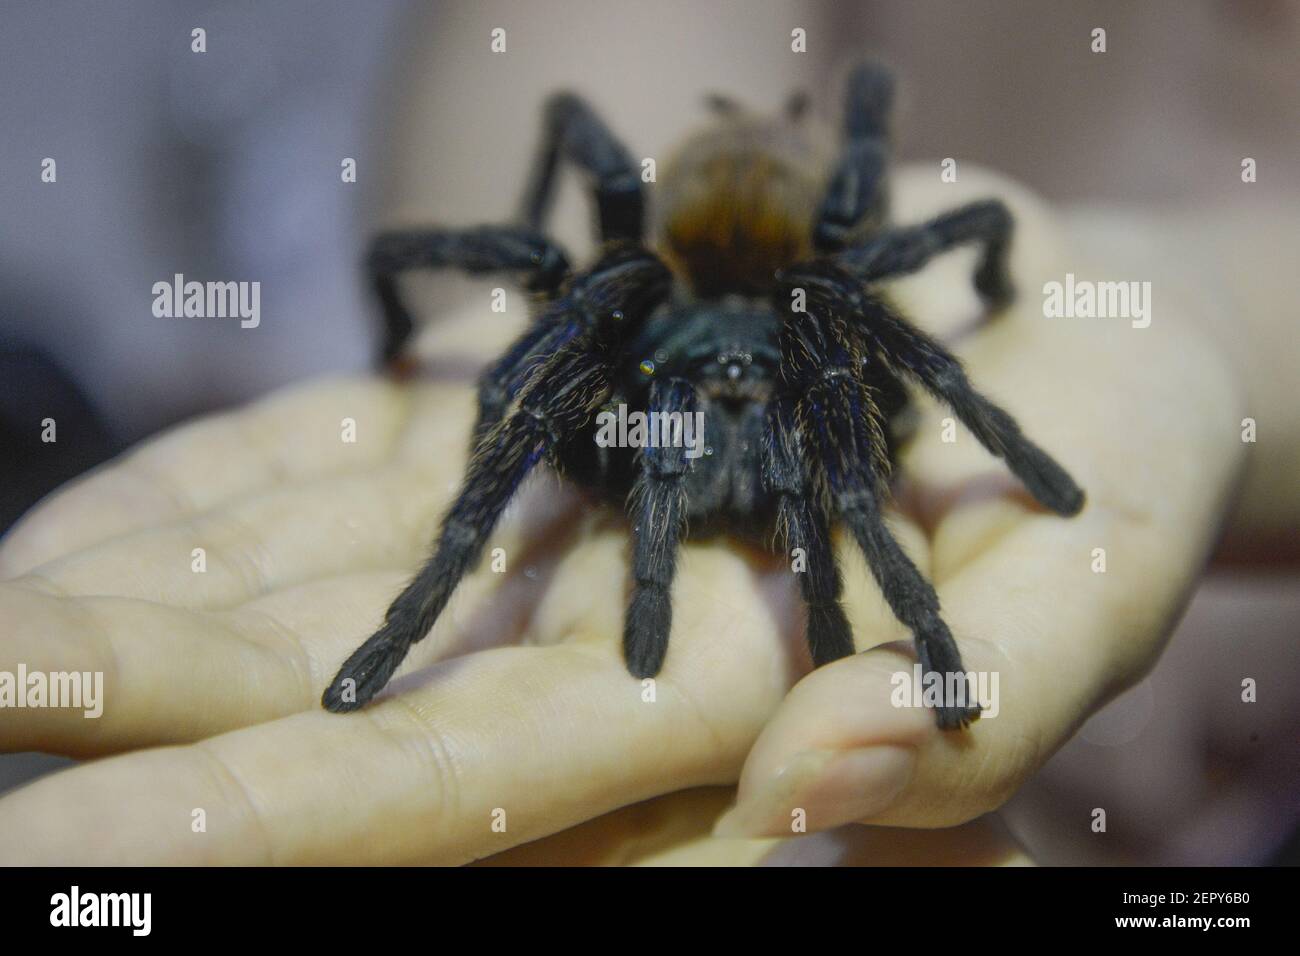 Tarantula Caribena versicolour from Mexico who became a collection of women named Ming Cu (29) has a tarantula at home, Bandung West Java, on February 22 2018. Tarantula maintain at home as much as 1,500 has been done Ming Cu since 7 years ago from various countries including India, Africa, America and countries in Europe. (Photo By Bukbisj Candra Ismeth Bey/Sipa USA) Stock Photo